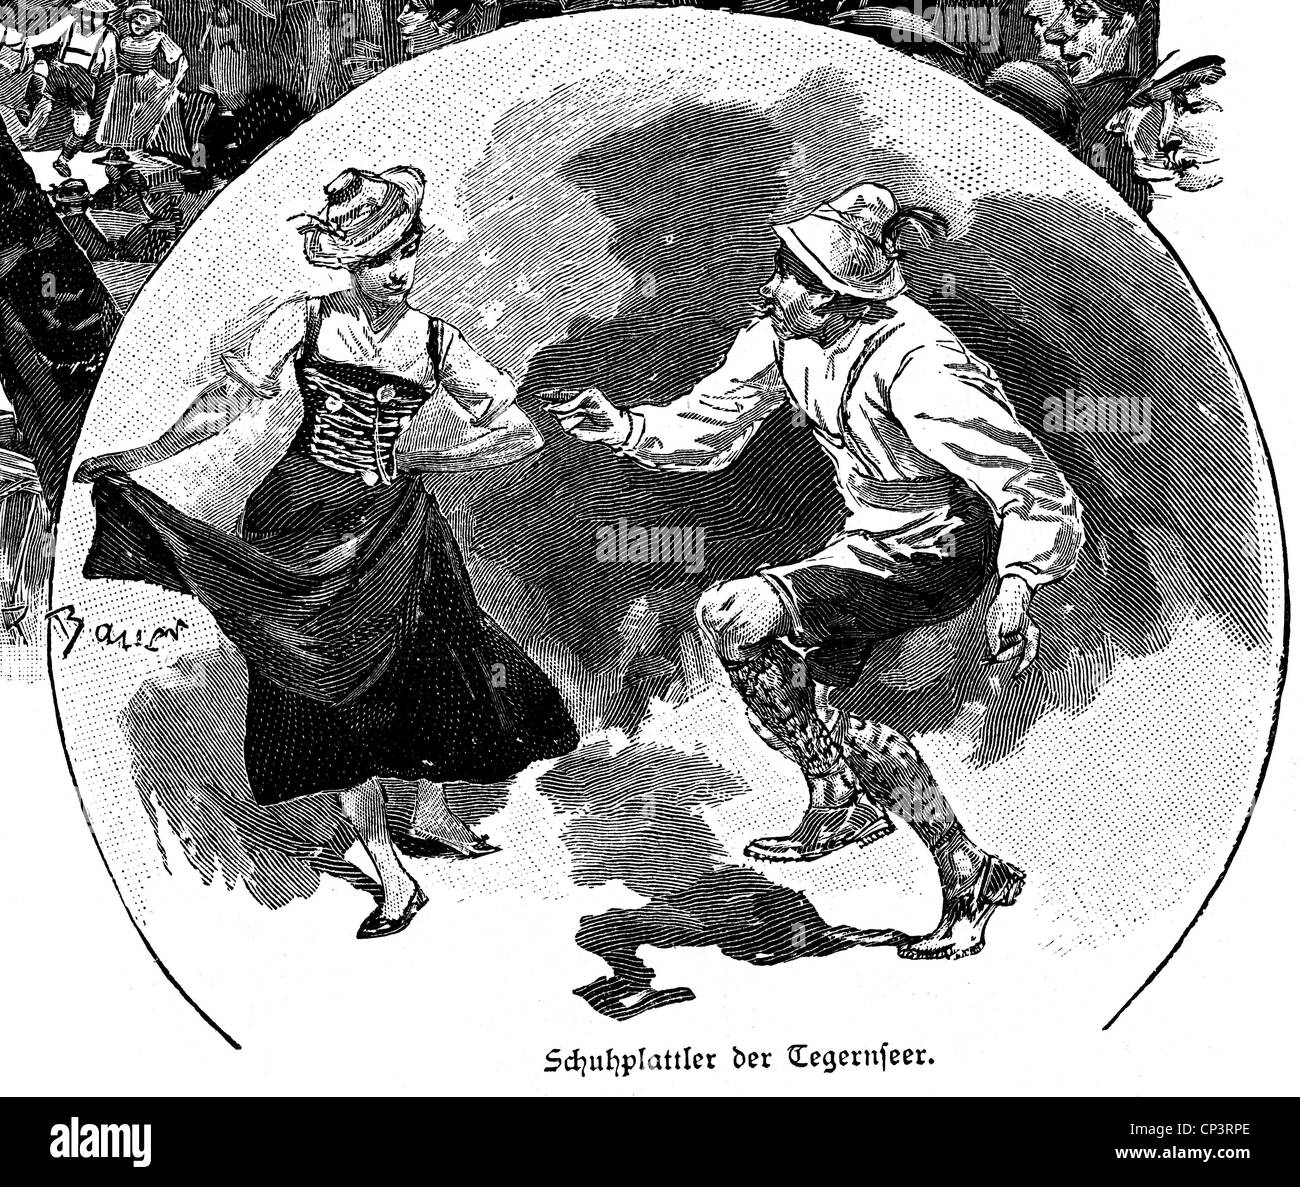 dance, folk dance, Schuhplattler, couple of Tegernsee, wood engraving, late 19th century, Additional-Rights-Clearences-Not Available Stock Photo